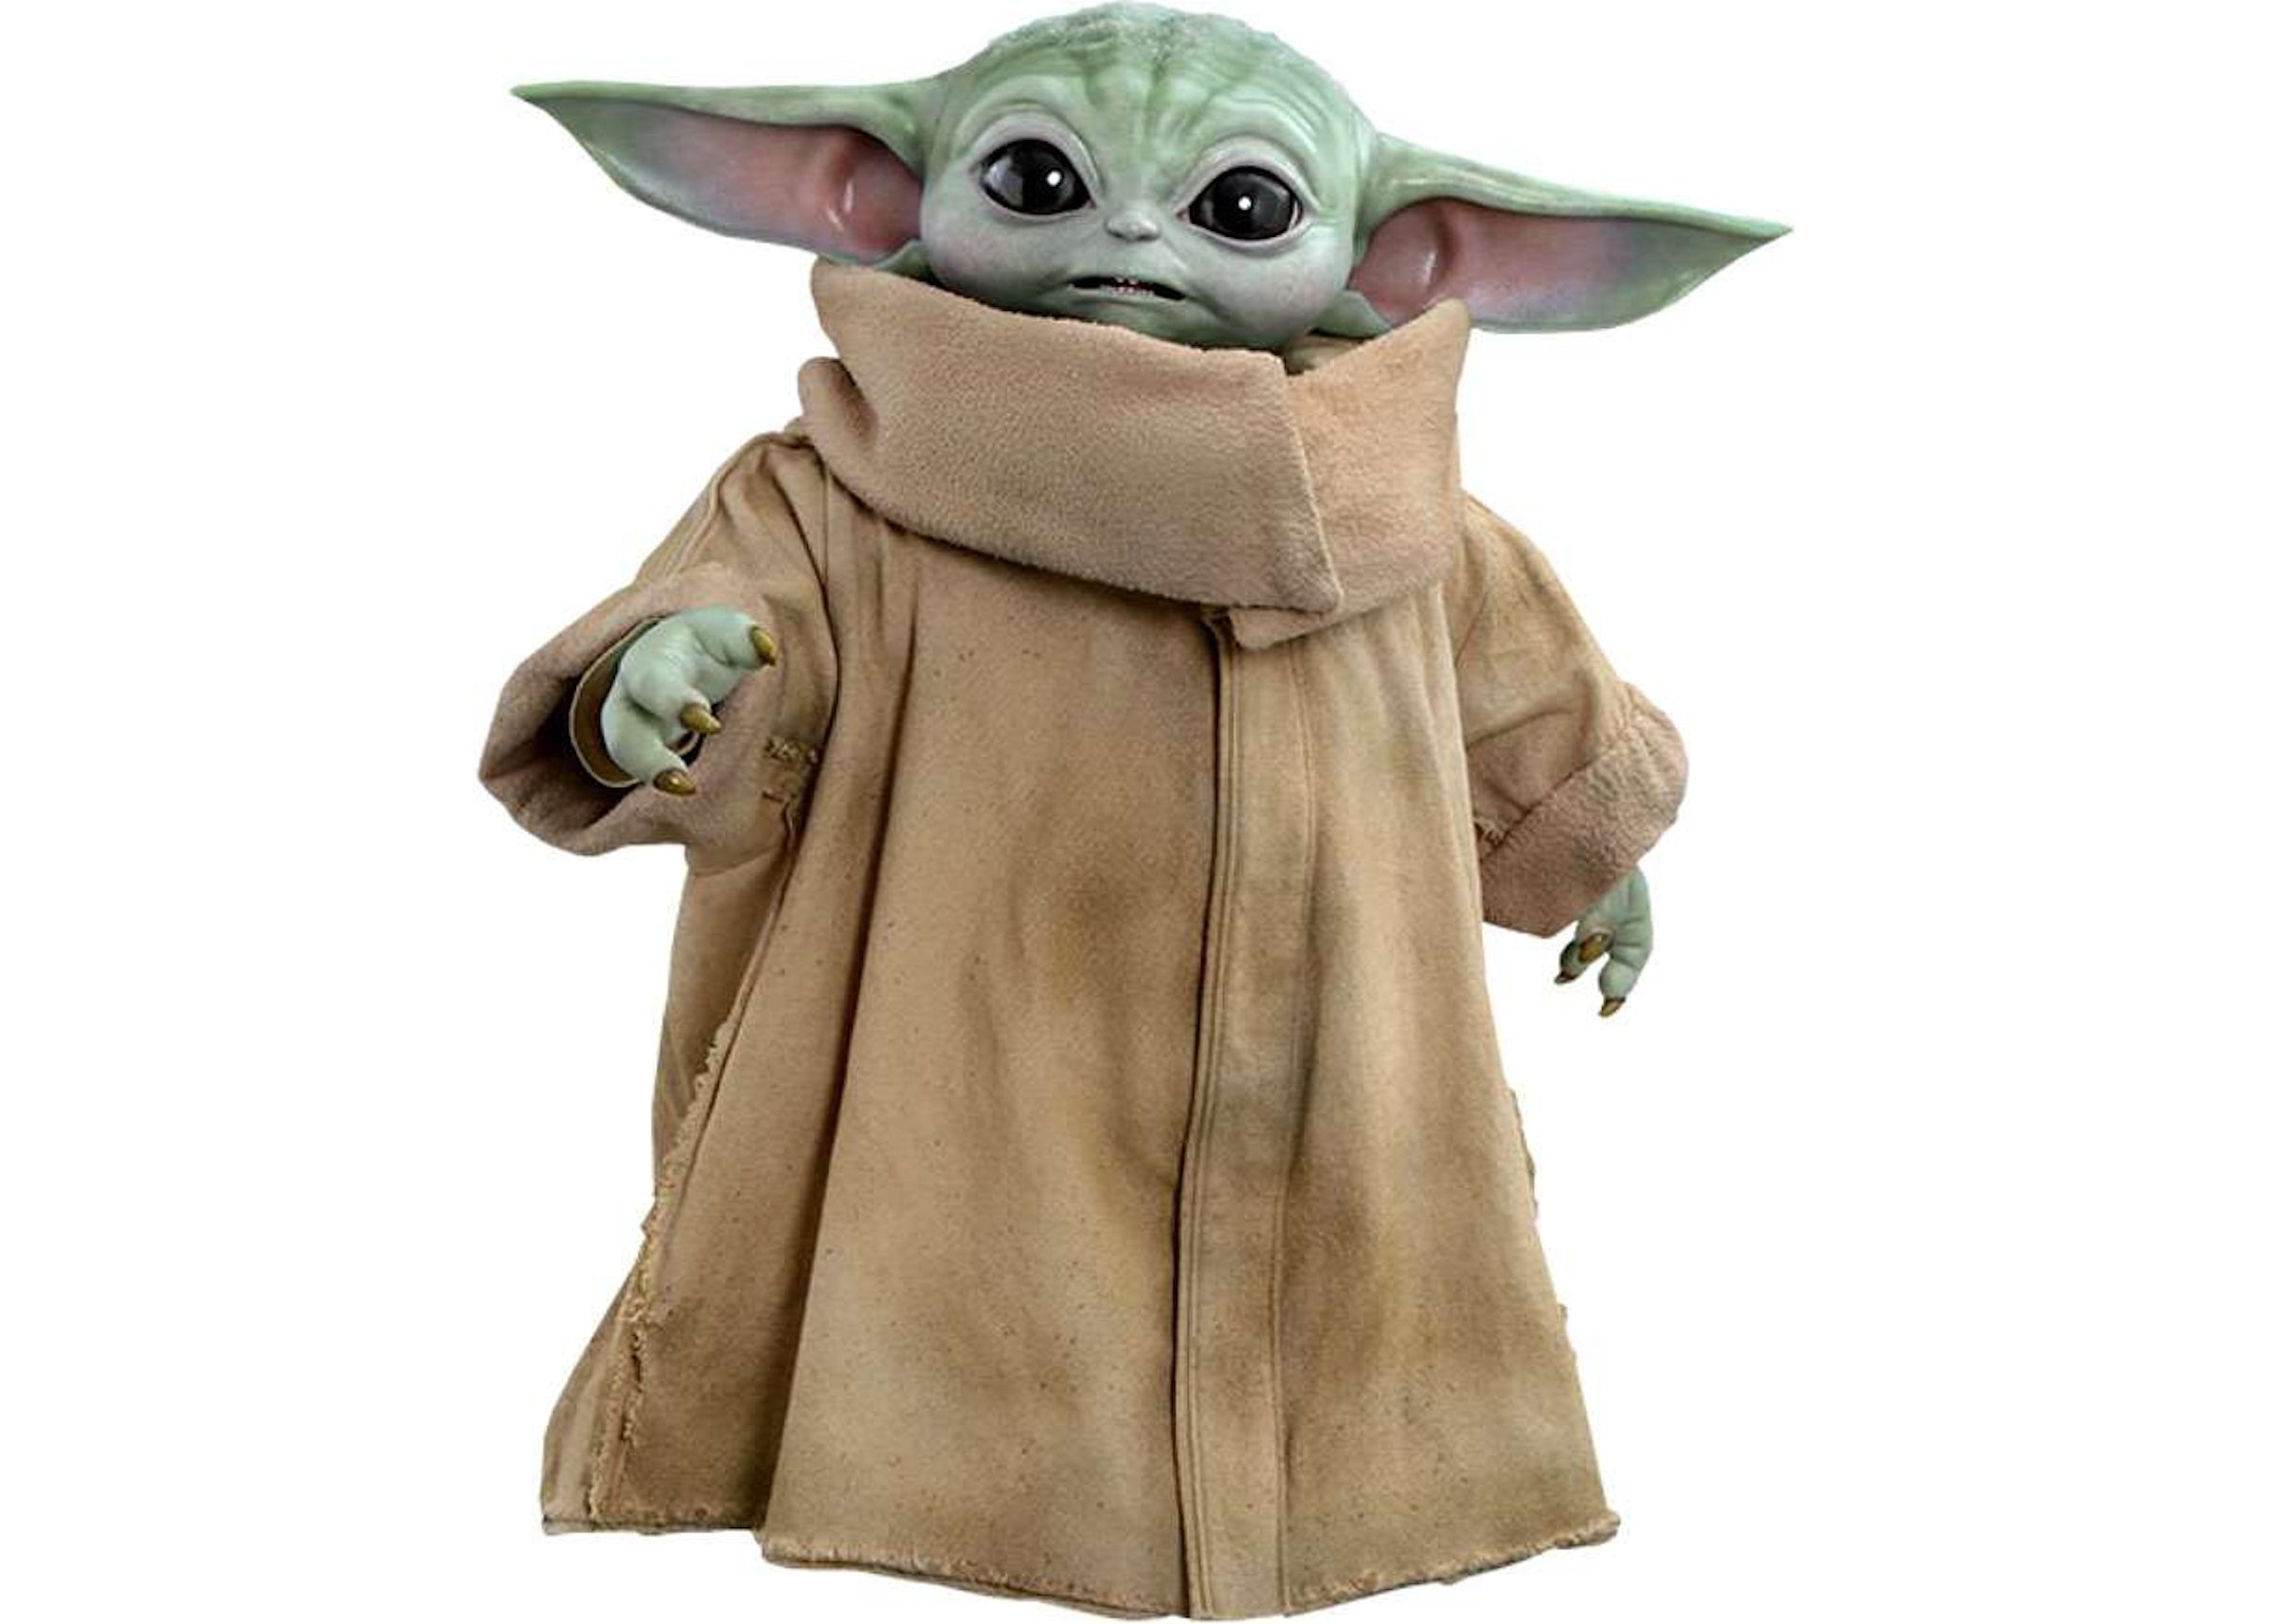 Hot Toys Star Wars The Mandalorian The Child Baby Yoda / Grogu,  Non-Refundable Down Payment Life-Size Collectible Figure - US